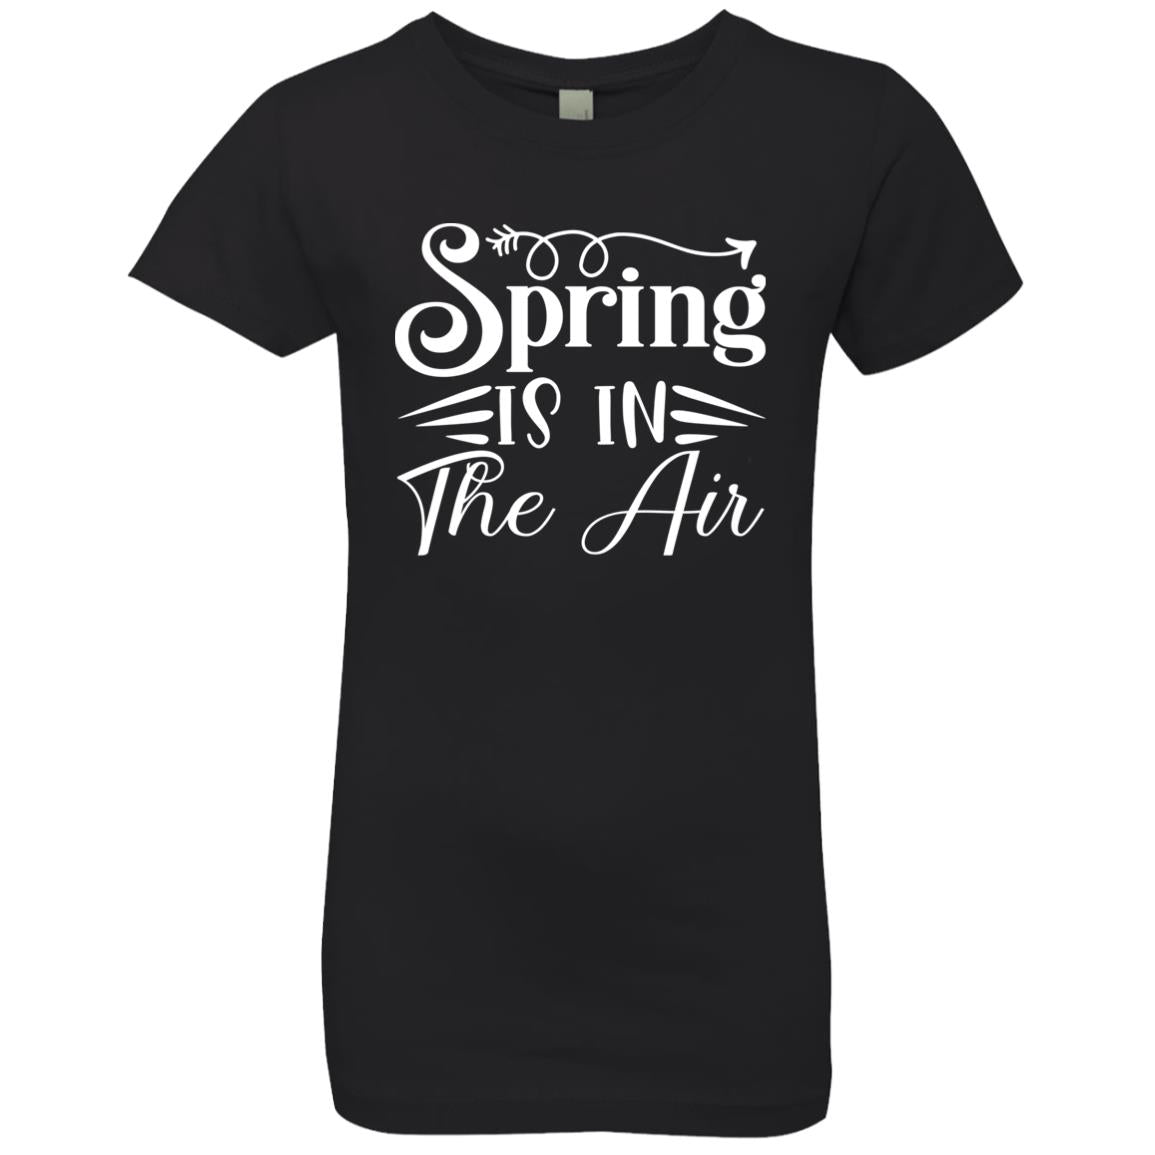 Spring Is in the Air | Short Sleeve Kids T-shrit | 100% Cotton